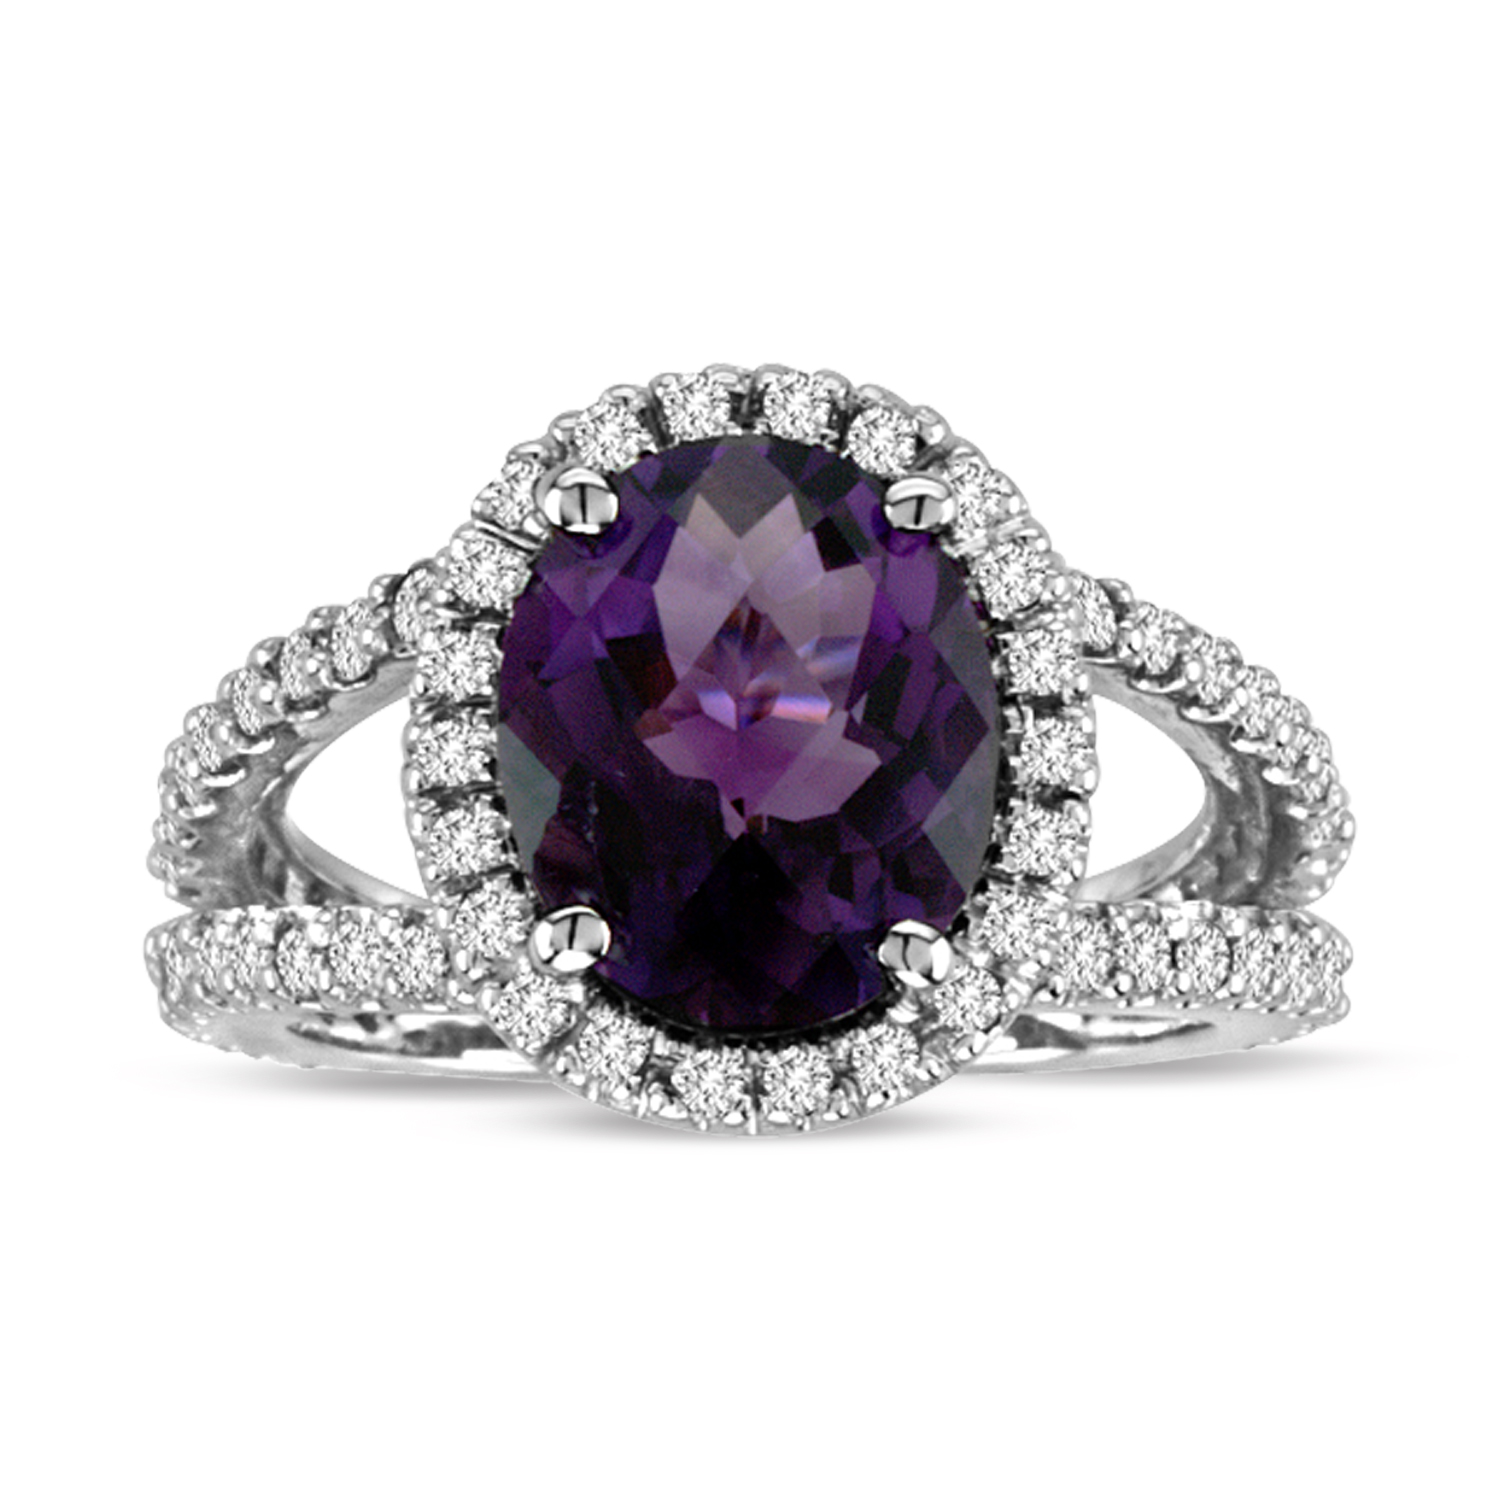 View 4.00ctw Amethyst and Diamond Split Shank Ring in 14k Gold